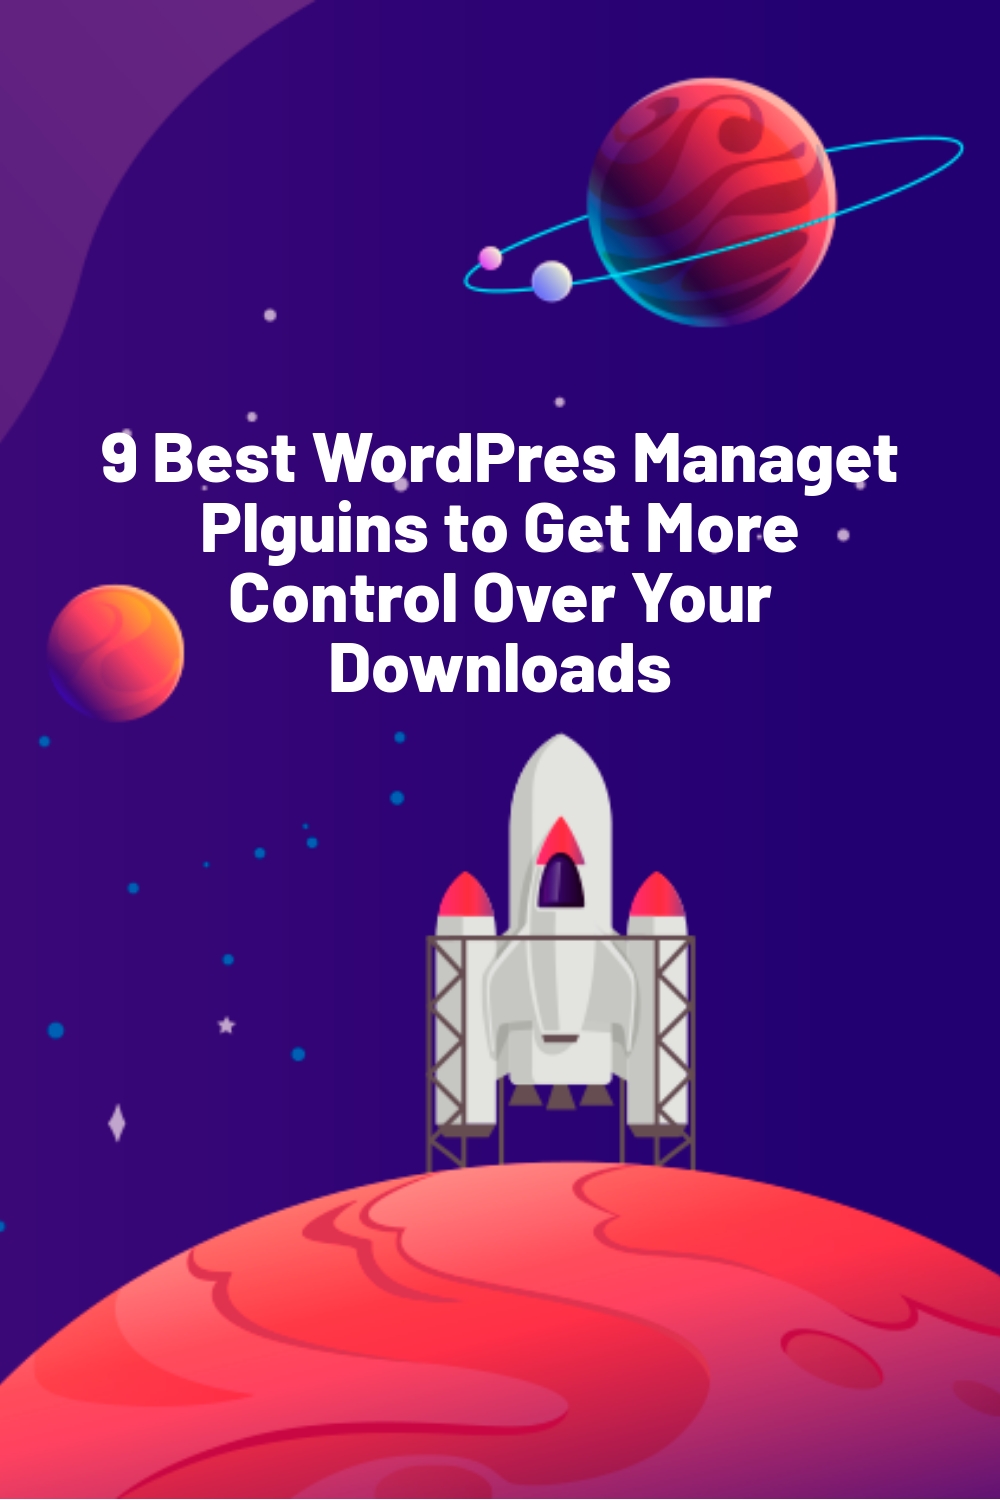 9 Best WordPres Managet Plguins to Get More Control Over Your Downloads